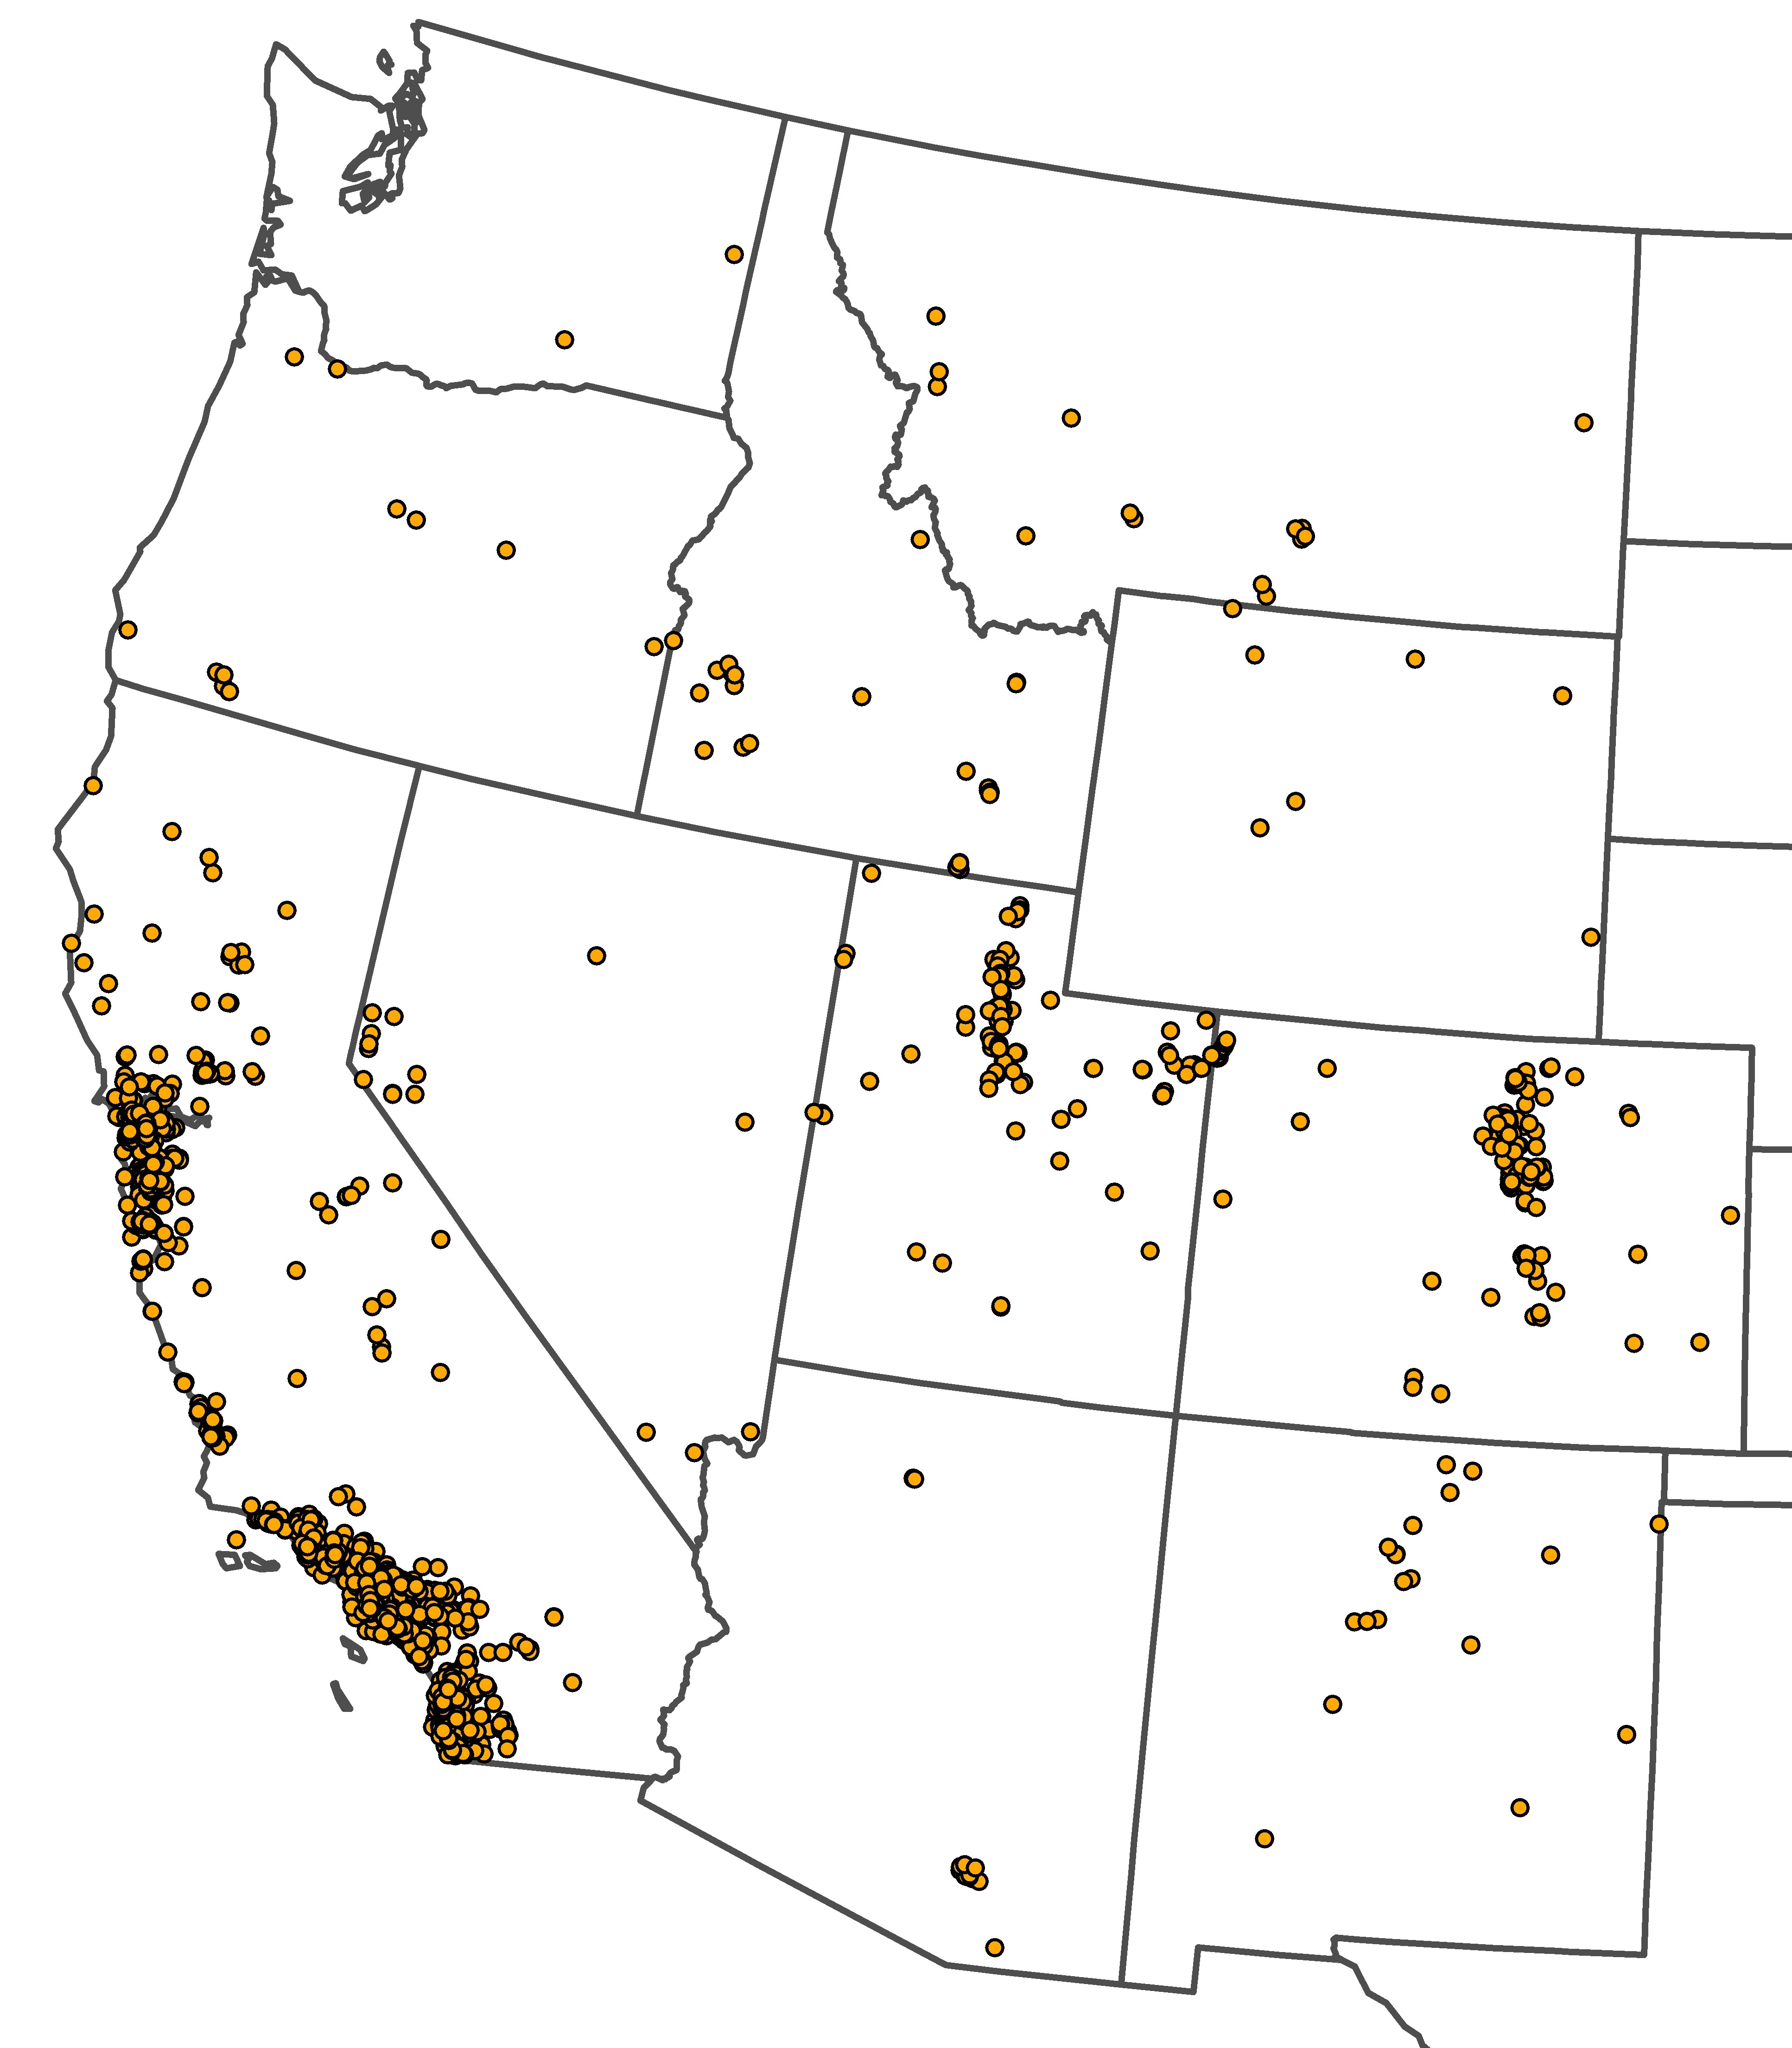 On a map of the western United States, the locations of monarch butterfly sightings during the summer of 2020 are marked with orange dots